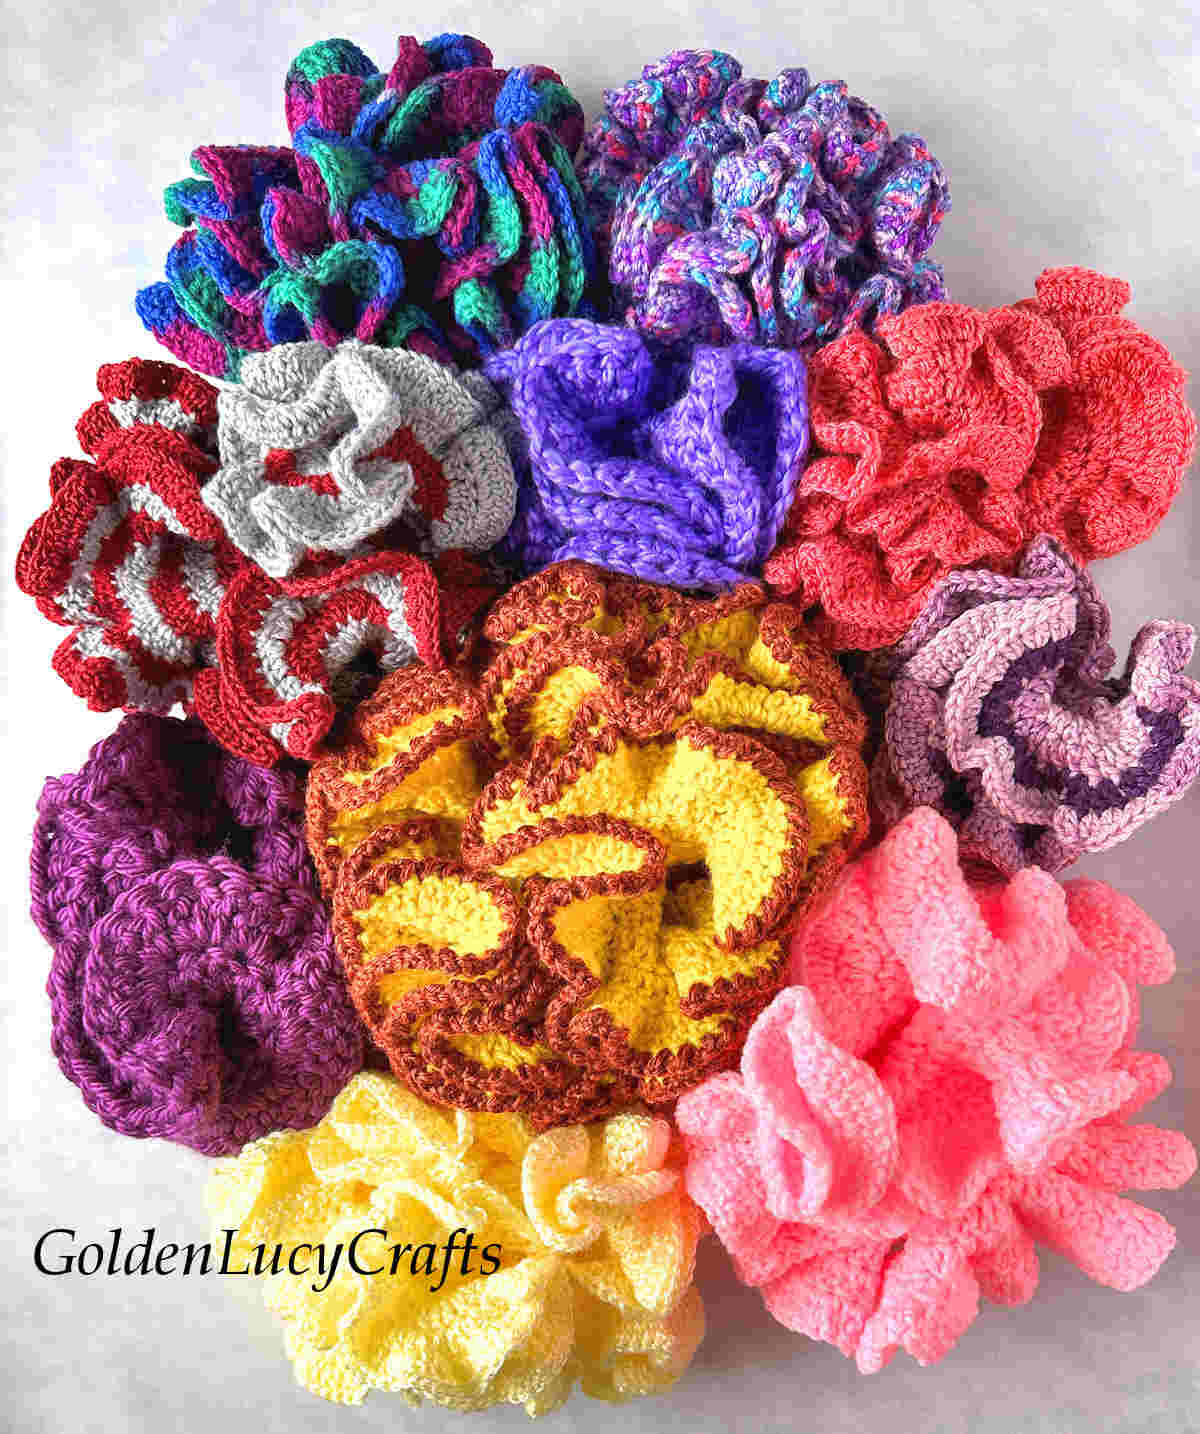 Bunch of crocheted corals for the community coral reef project.